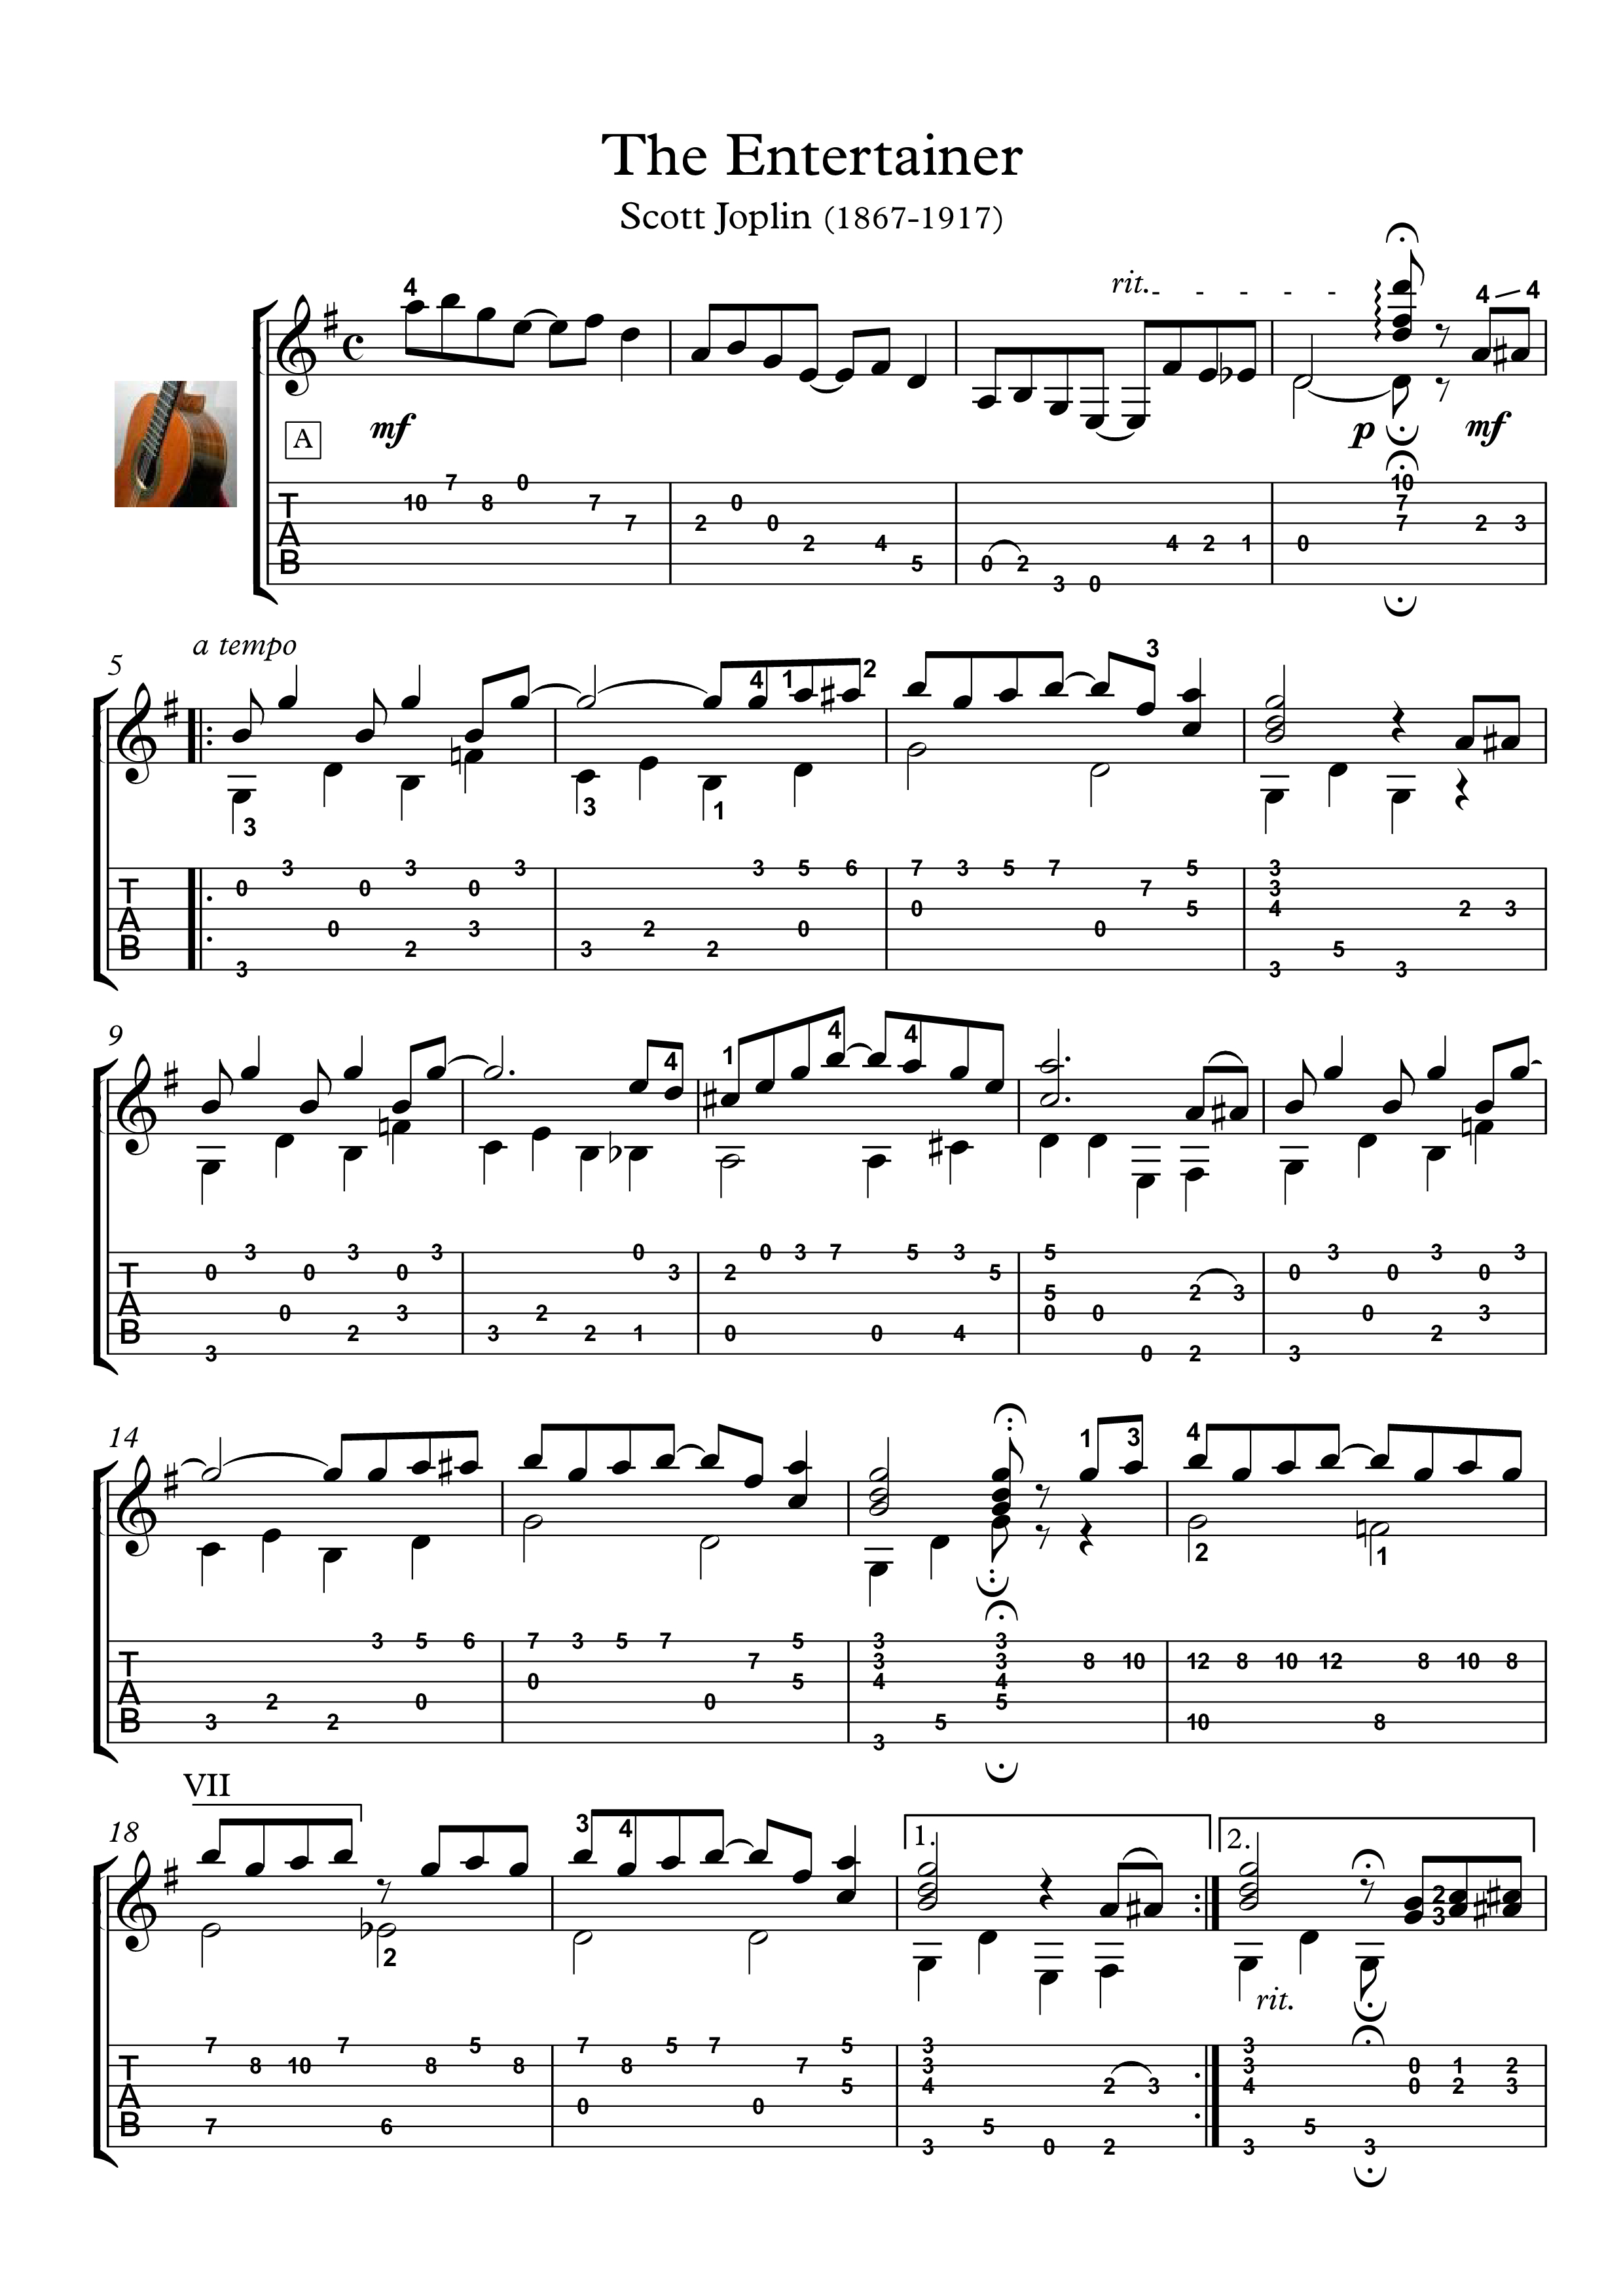 The Entertainer&amp;quot; Is A 1902 Classic Rag Writtenscott Joplin. Here - Free Printable Sheet Music For The Entertainer